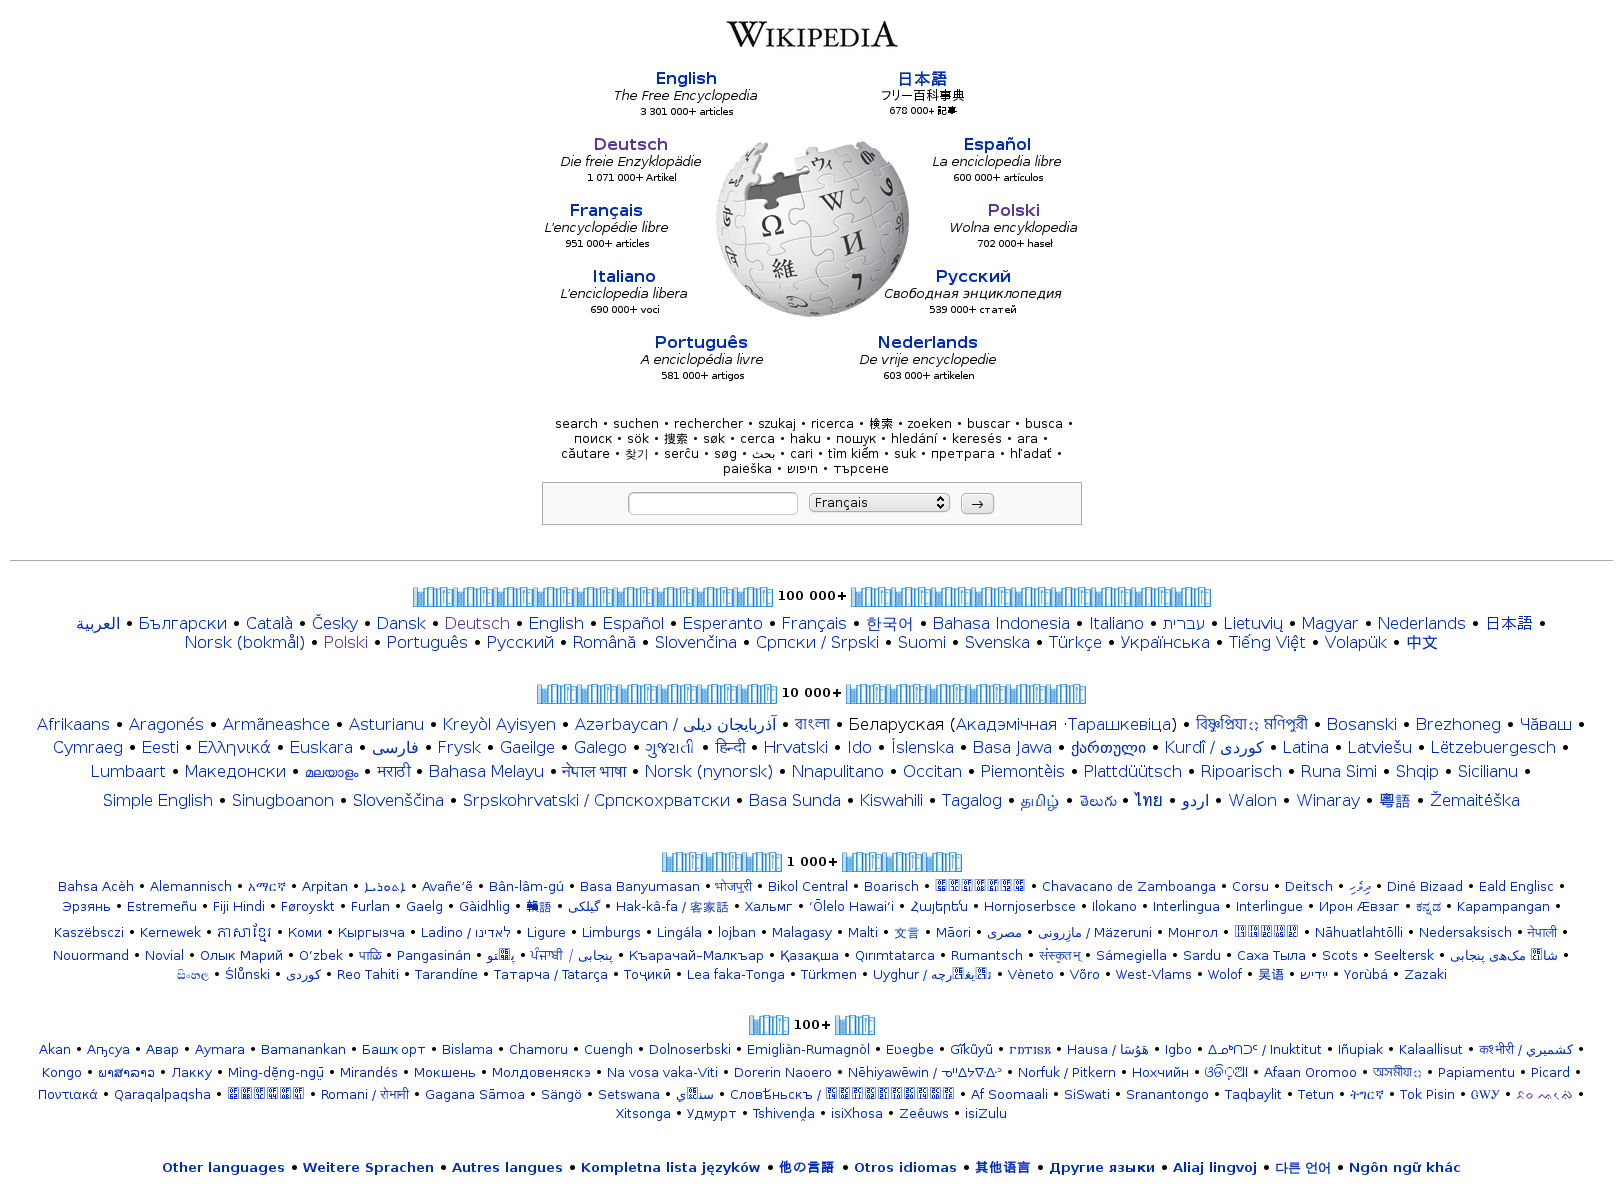 Screenshot of the wikipedia.org portal; The Wikipedia logo is surrounded by the 10 largest language editions, then languages are listed in size groups